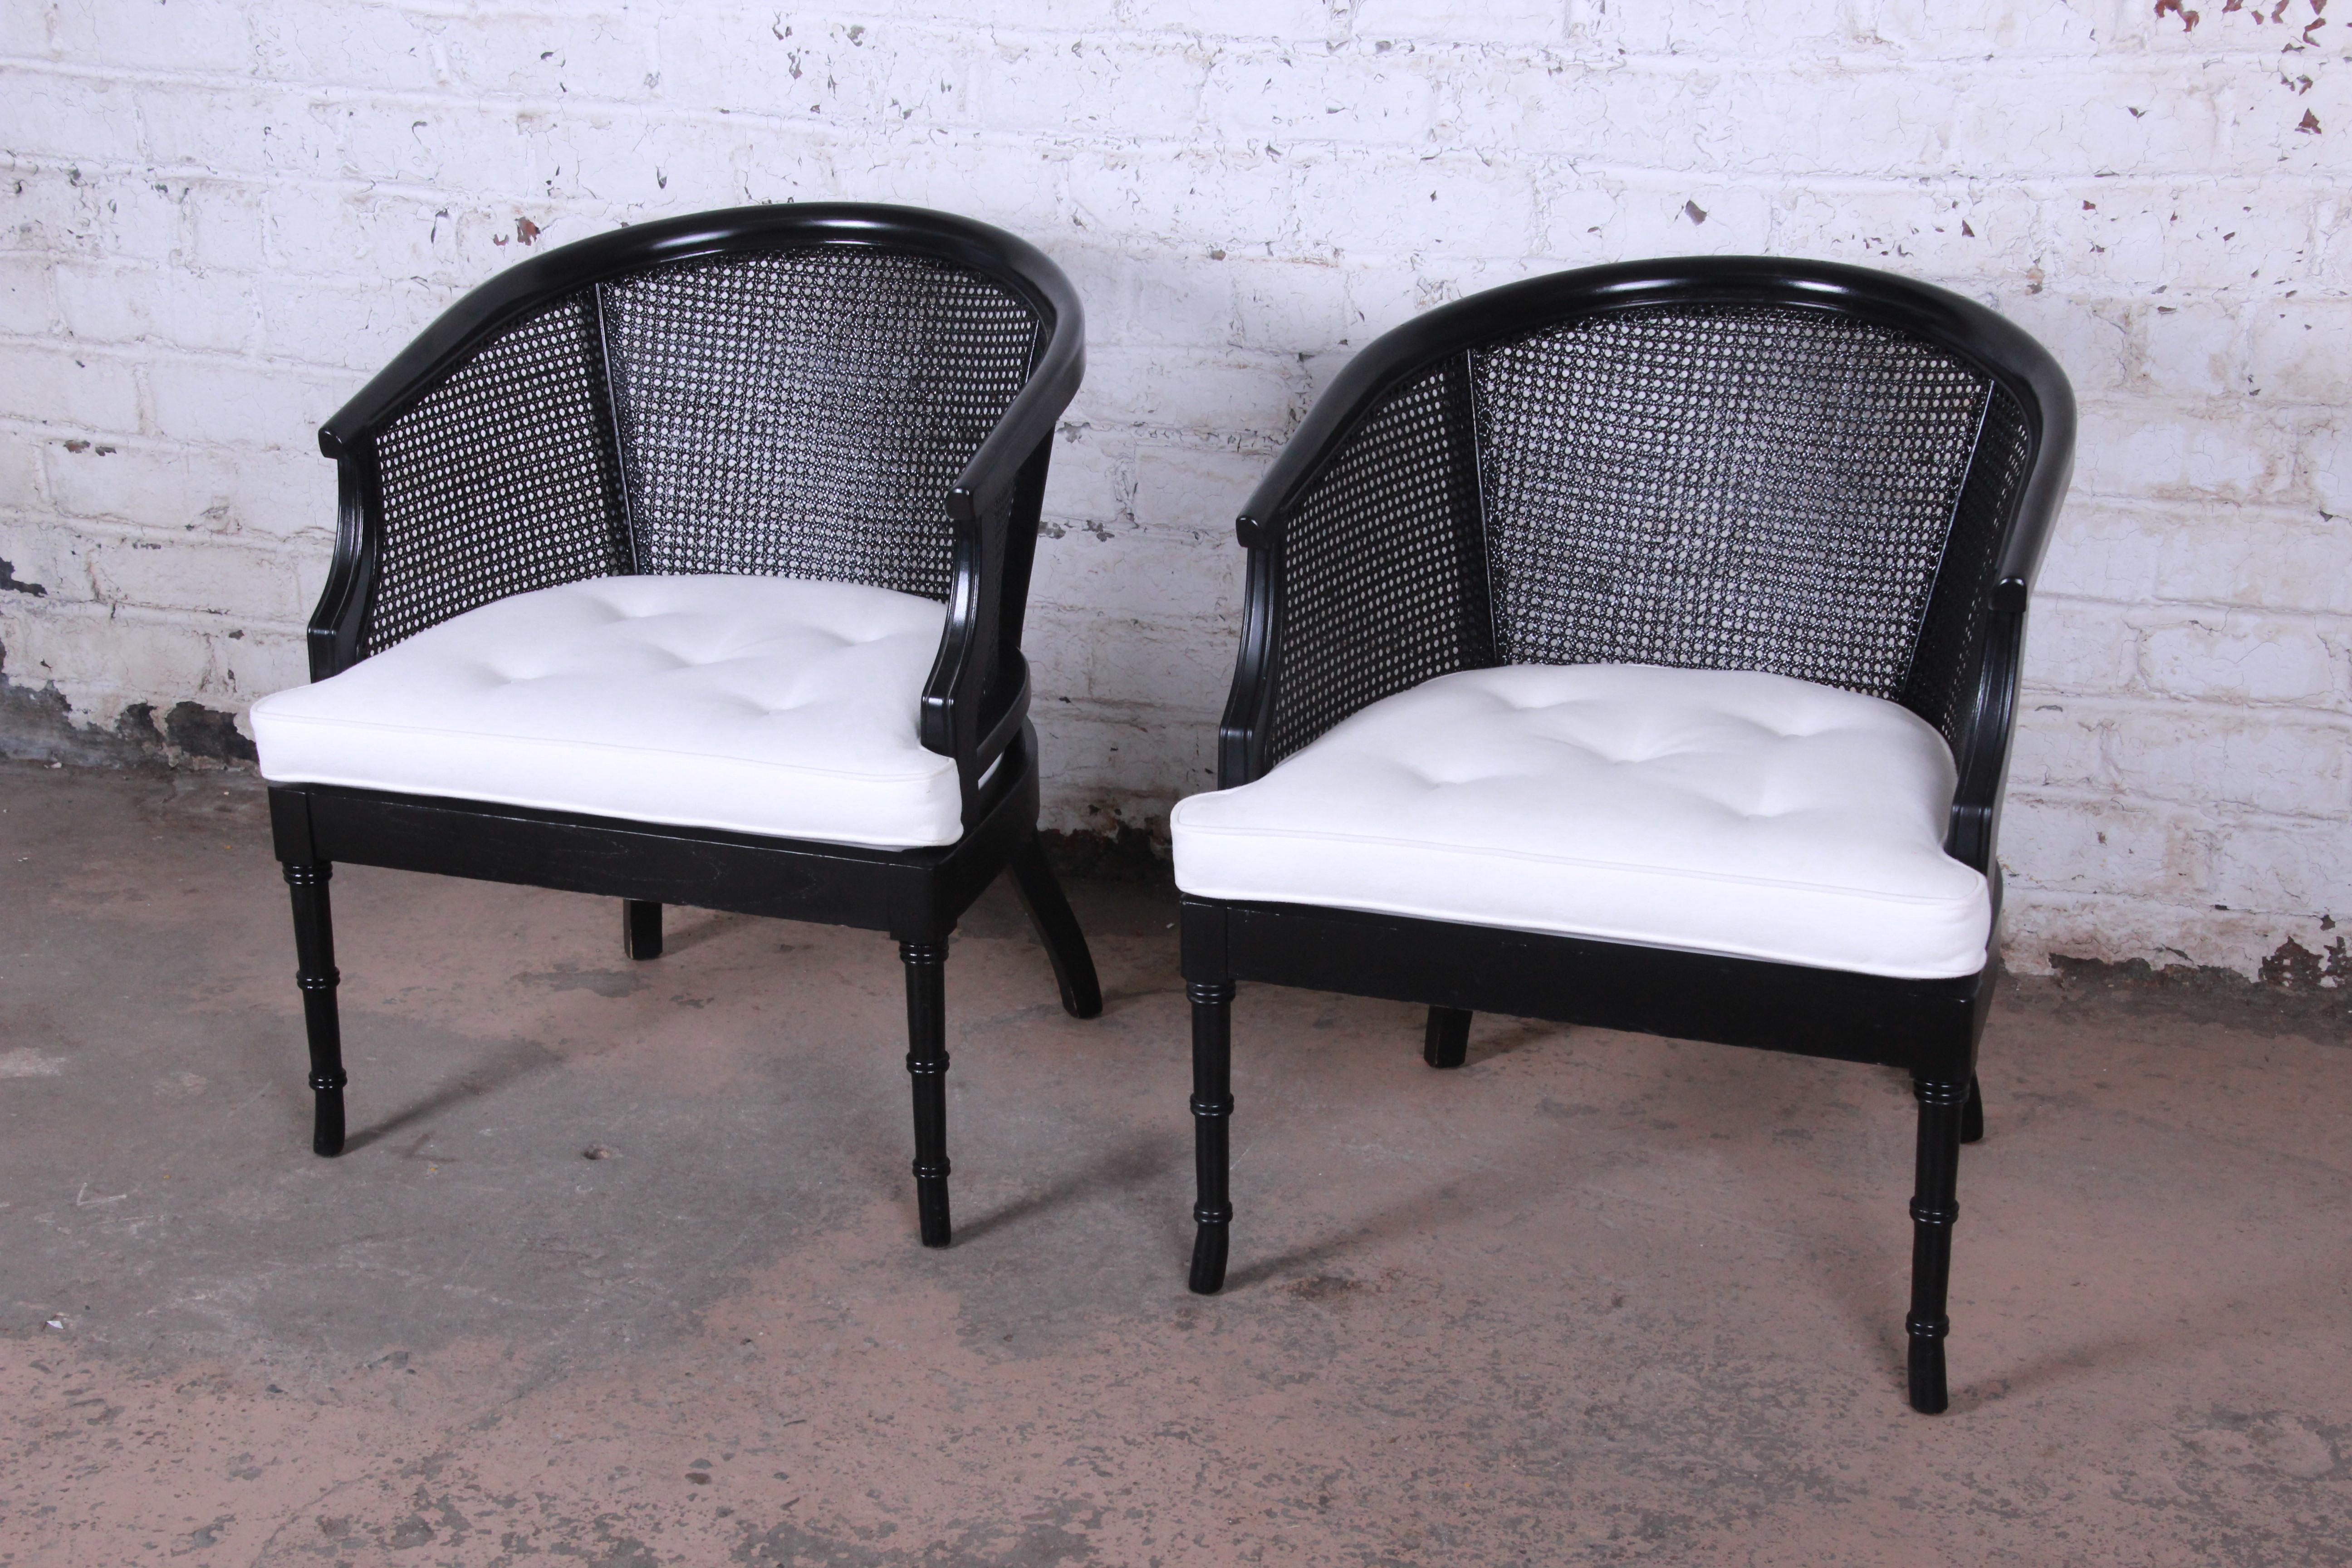 A gorgeous pair of Mid-Century Modern Hollywood Regency faux bamboo and cane barrel back club chairs. The chairs feature stunning ebonized wood frames and tufted white seat cushions. The caning is all intact and seat cushions are in very good